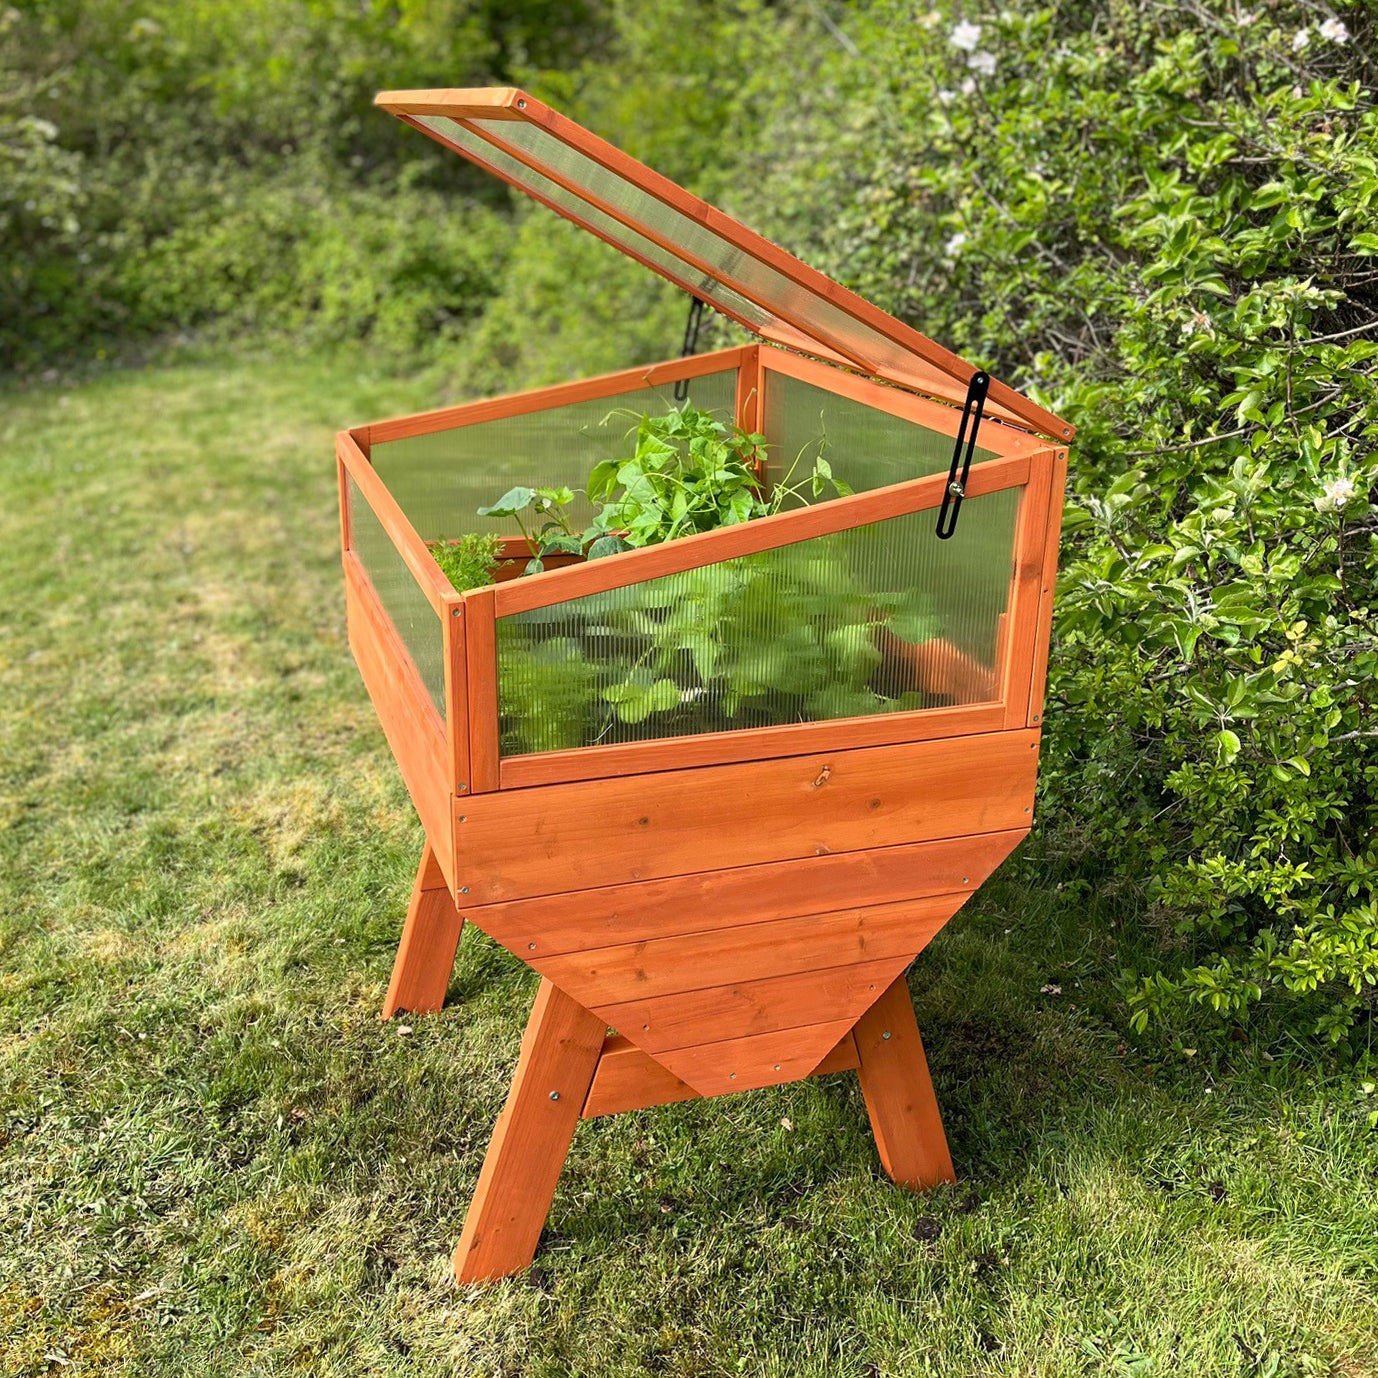 Veg-Trough Medium Wooden Raised Vegetable Bed Planter with Polycarbonate Cold Frame